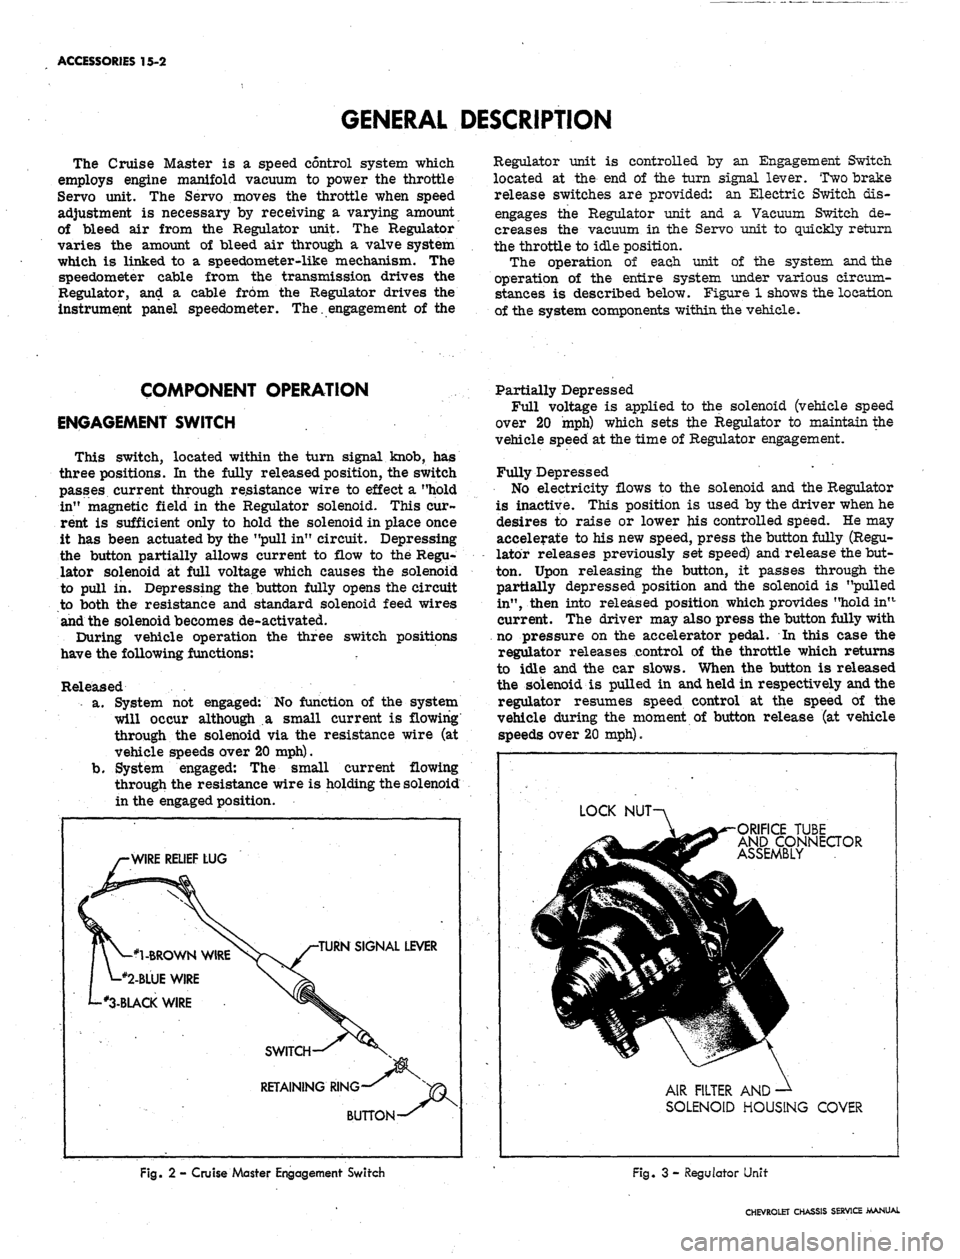 CHEVROLET CAMARO 1967 1.G Chassis Workshop Manual 
ACCESSORIES 15-2

GENERAL DESCRIPTION

The Cruise Master is a speed control system which

employs engine manifold vacuum to power the throttle

Servo unit. The Servo moves the throttle when speed

ad